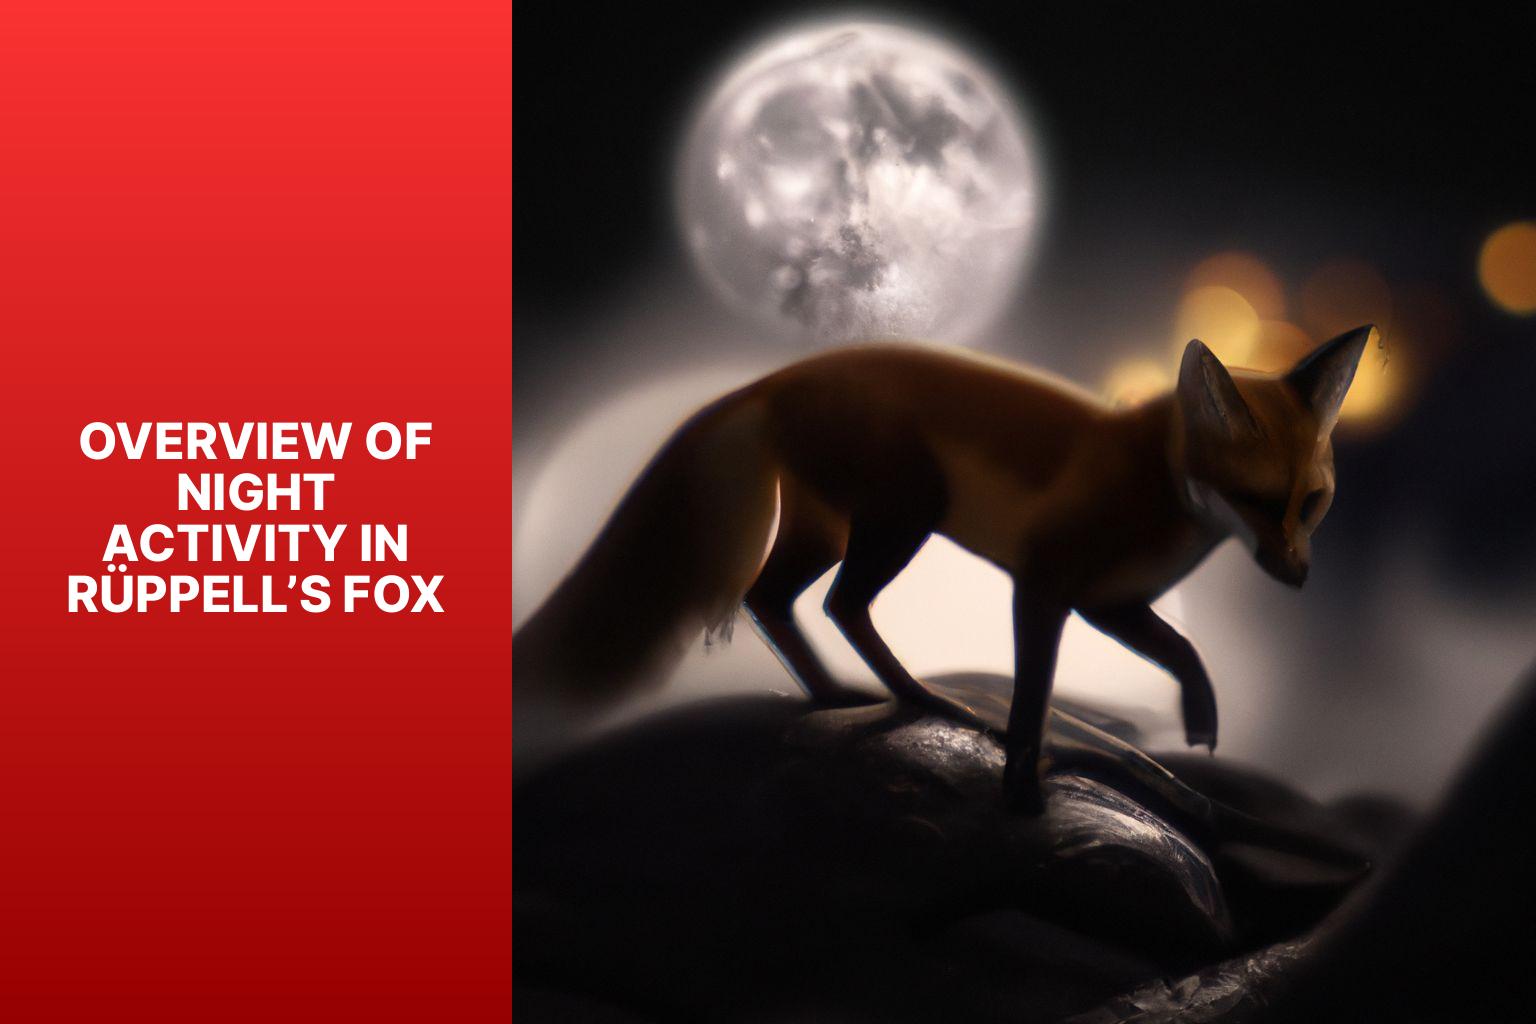 Overview of Night Activity in R ppell s Fox - R ppell s Fox Night Activity 